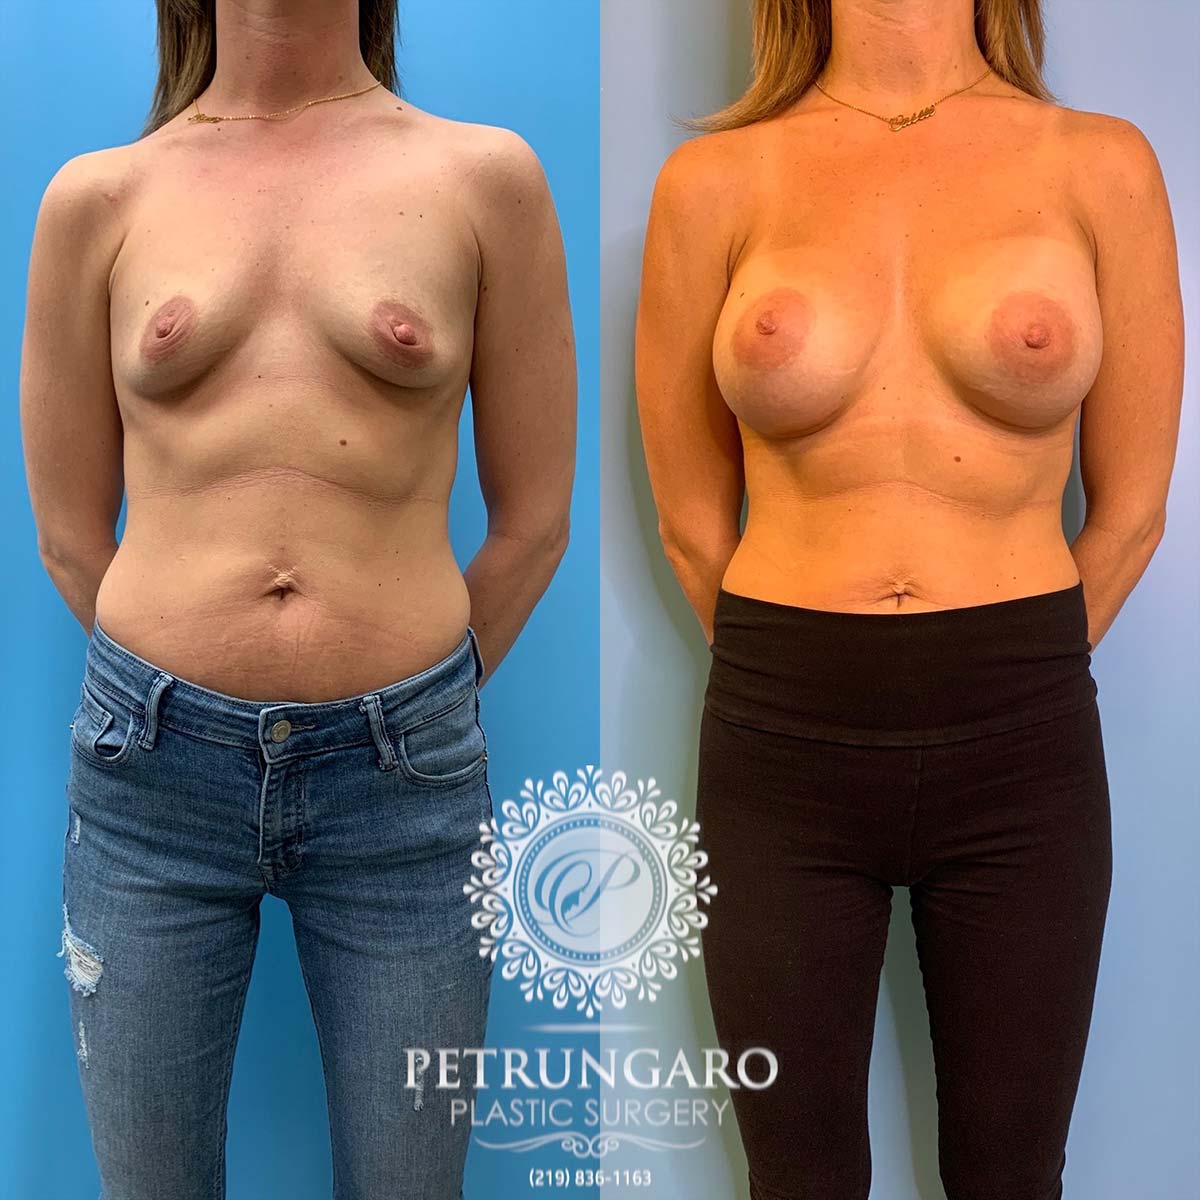 37 year old woman 3 months after breast augmentation-1